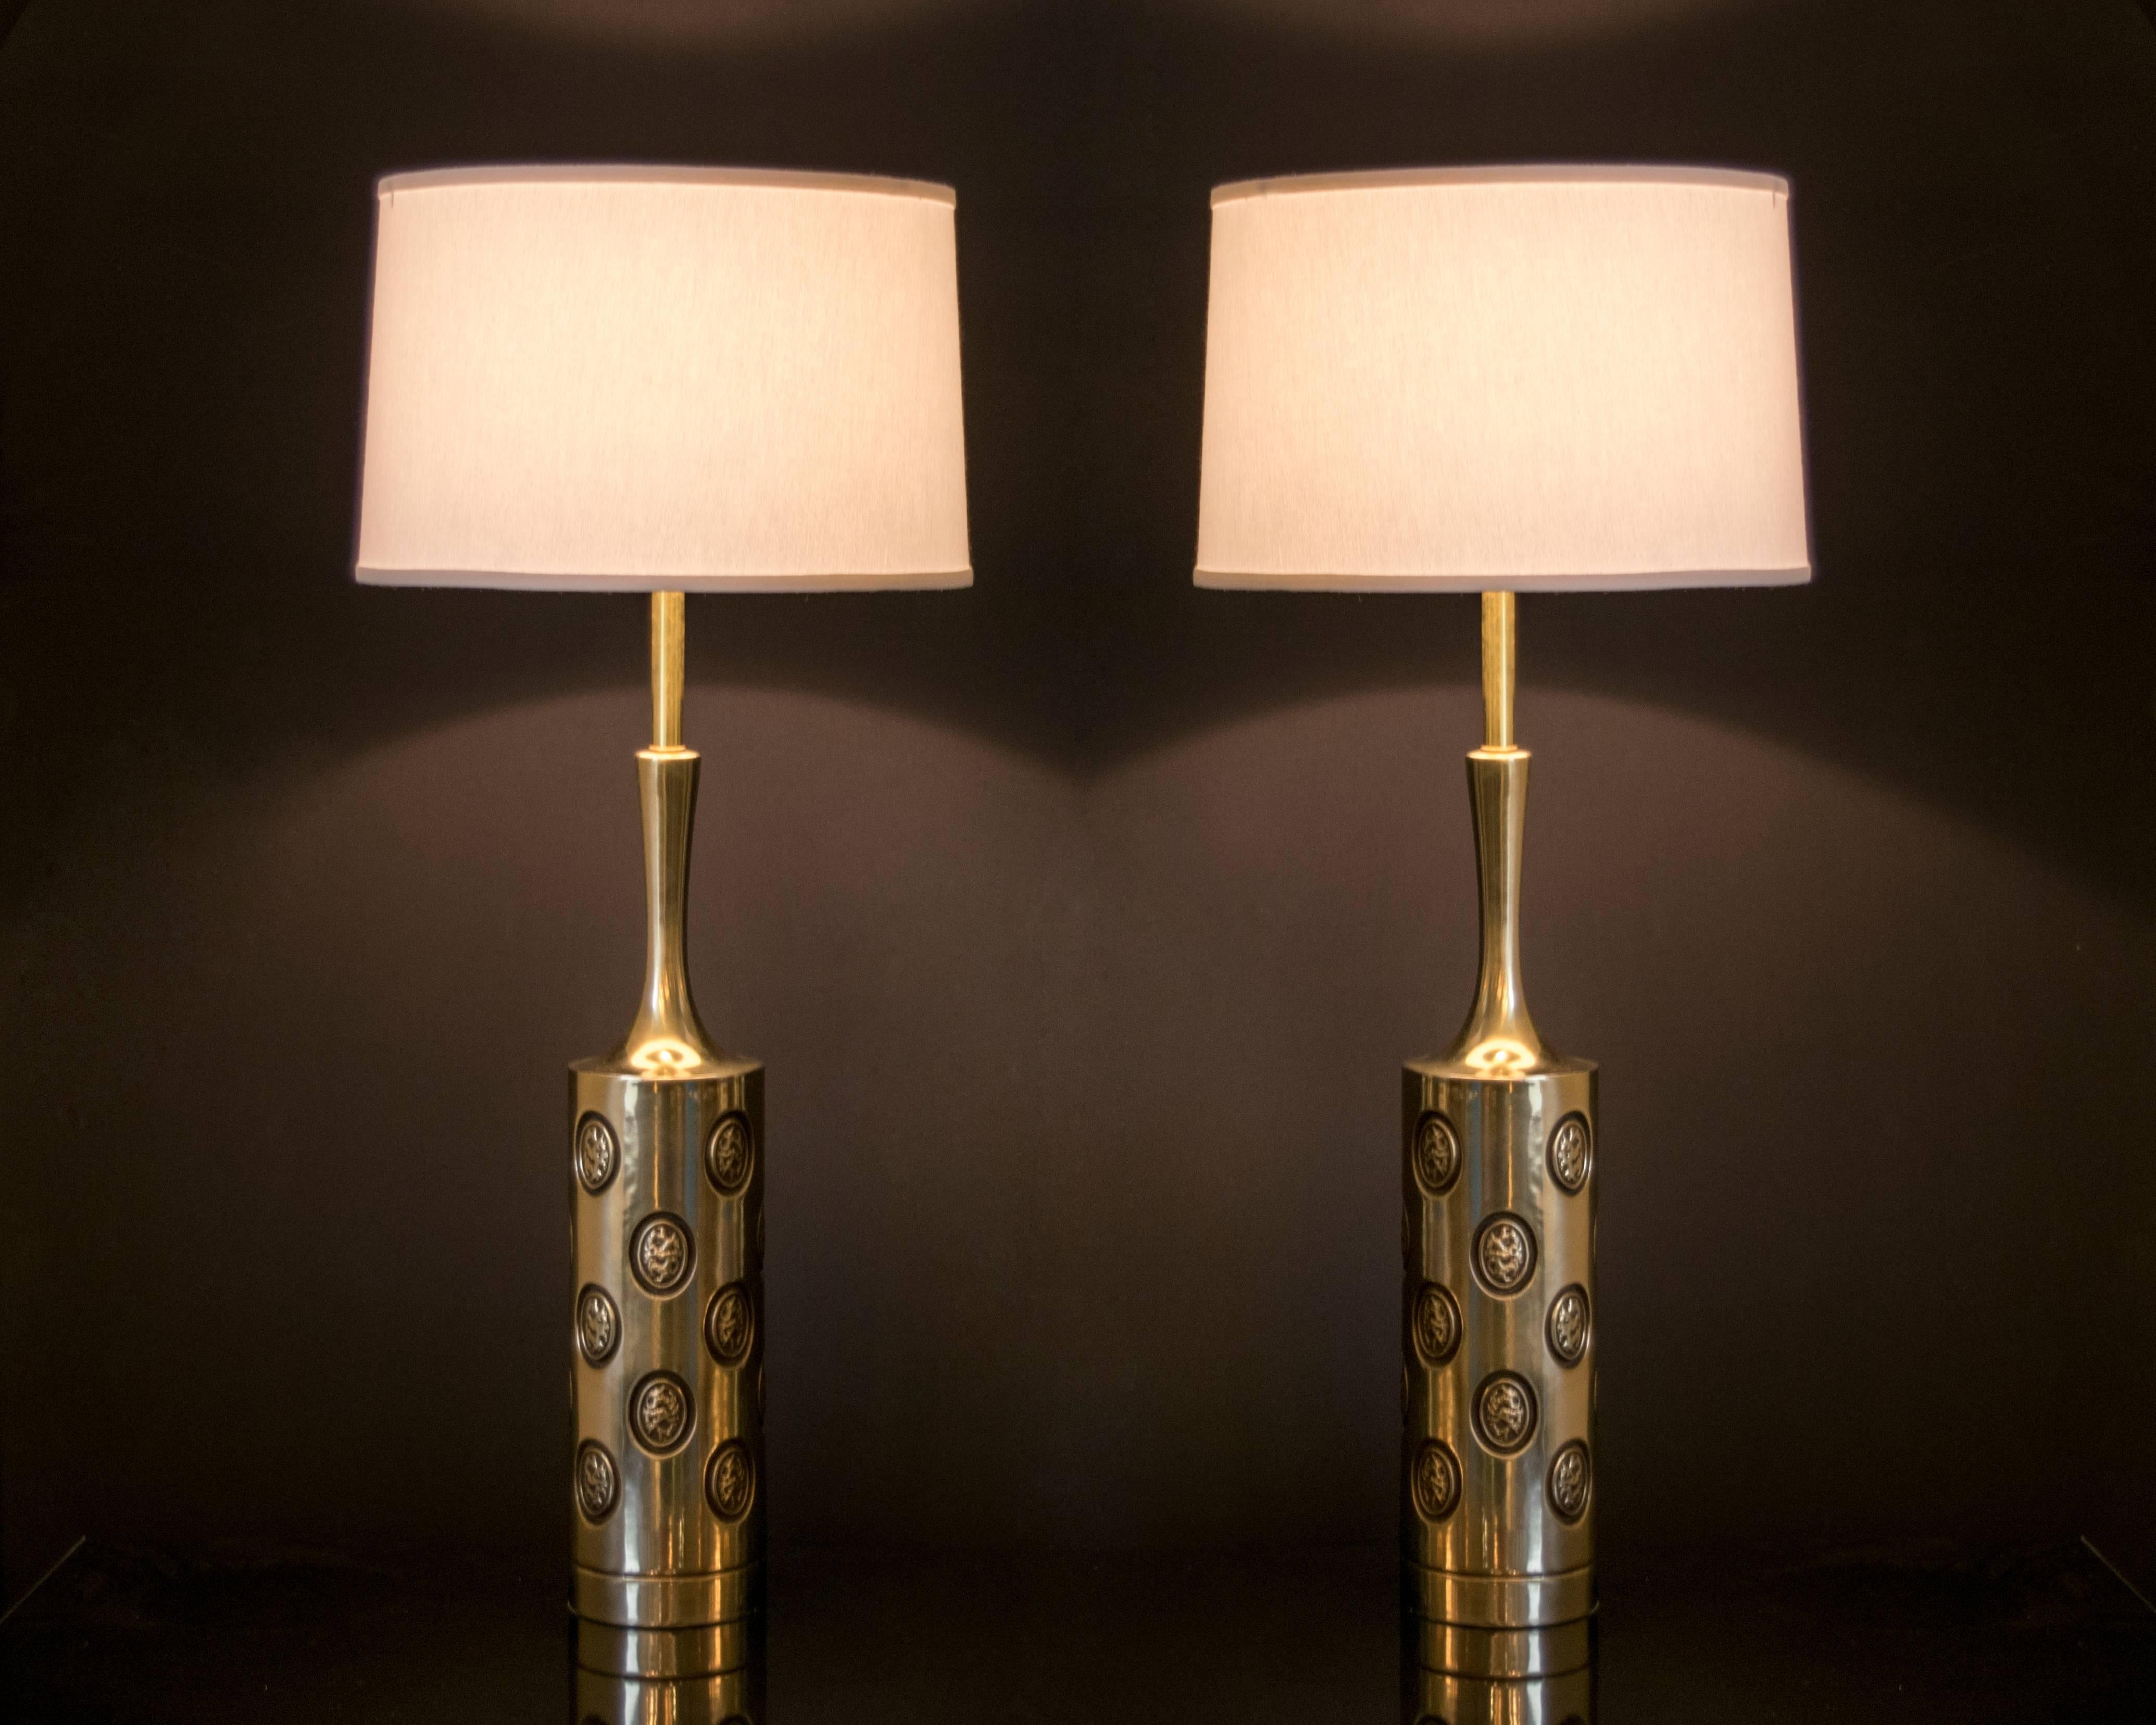 An elegant pair of vintage Rembrandt brass lamps with coin inlays detailed with black lacquer. Excellent condition, recently re-wired.